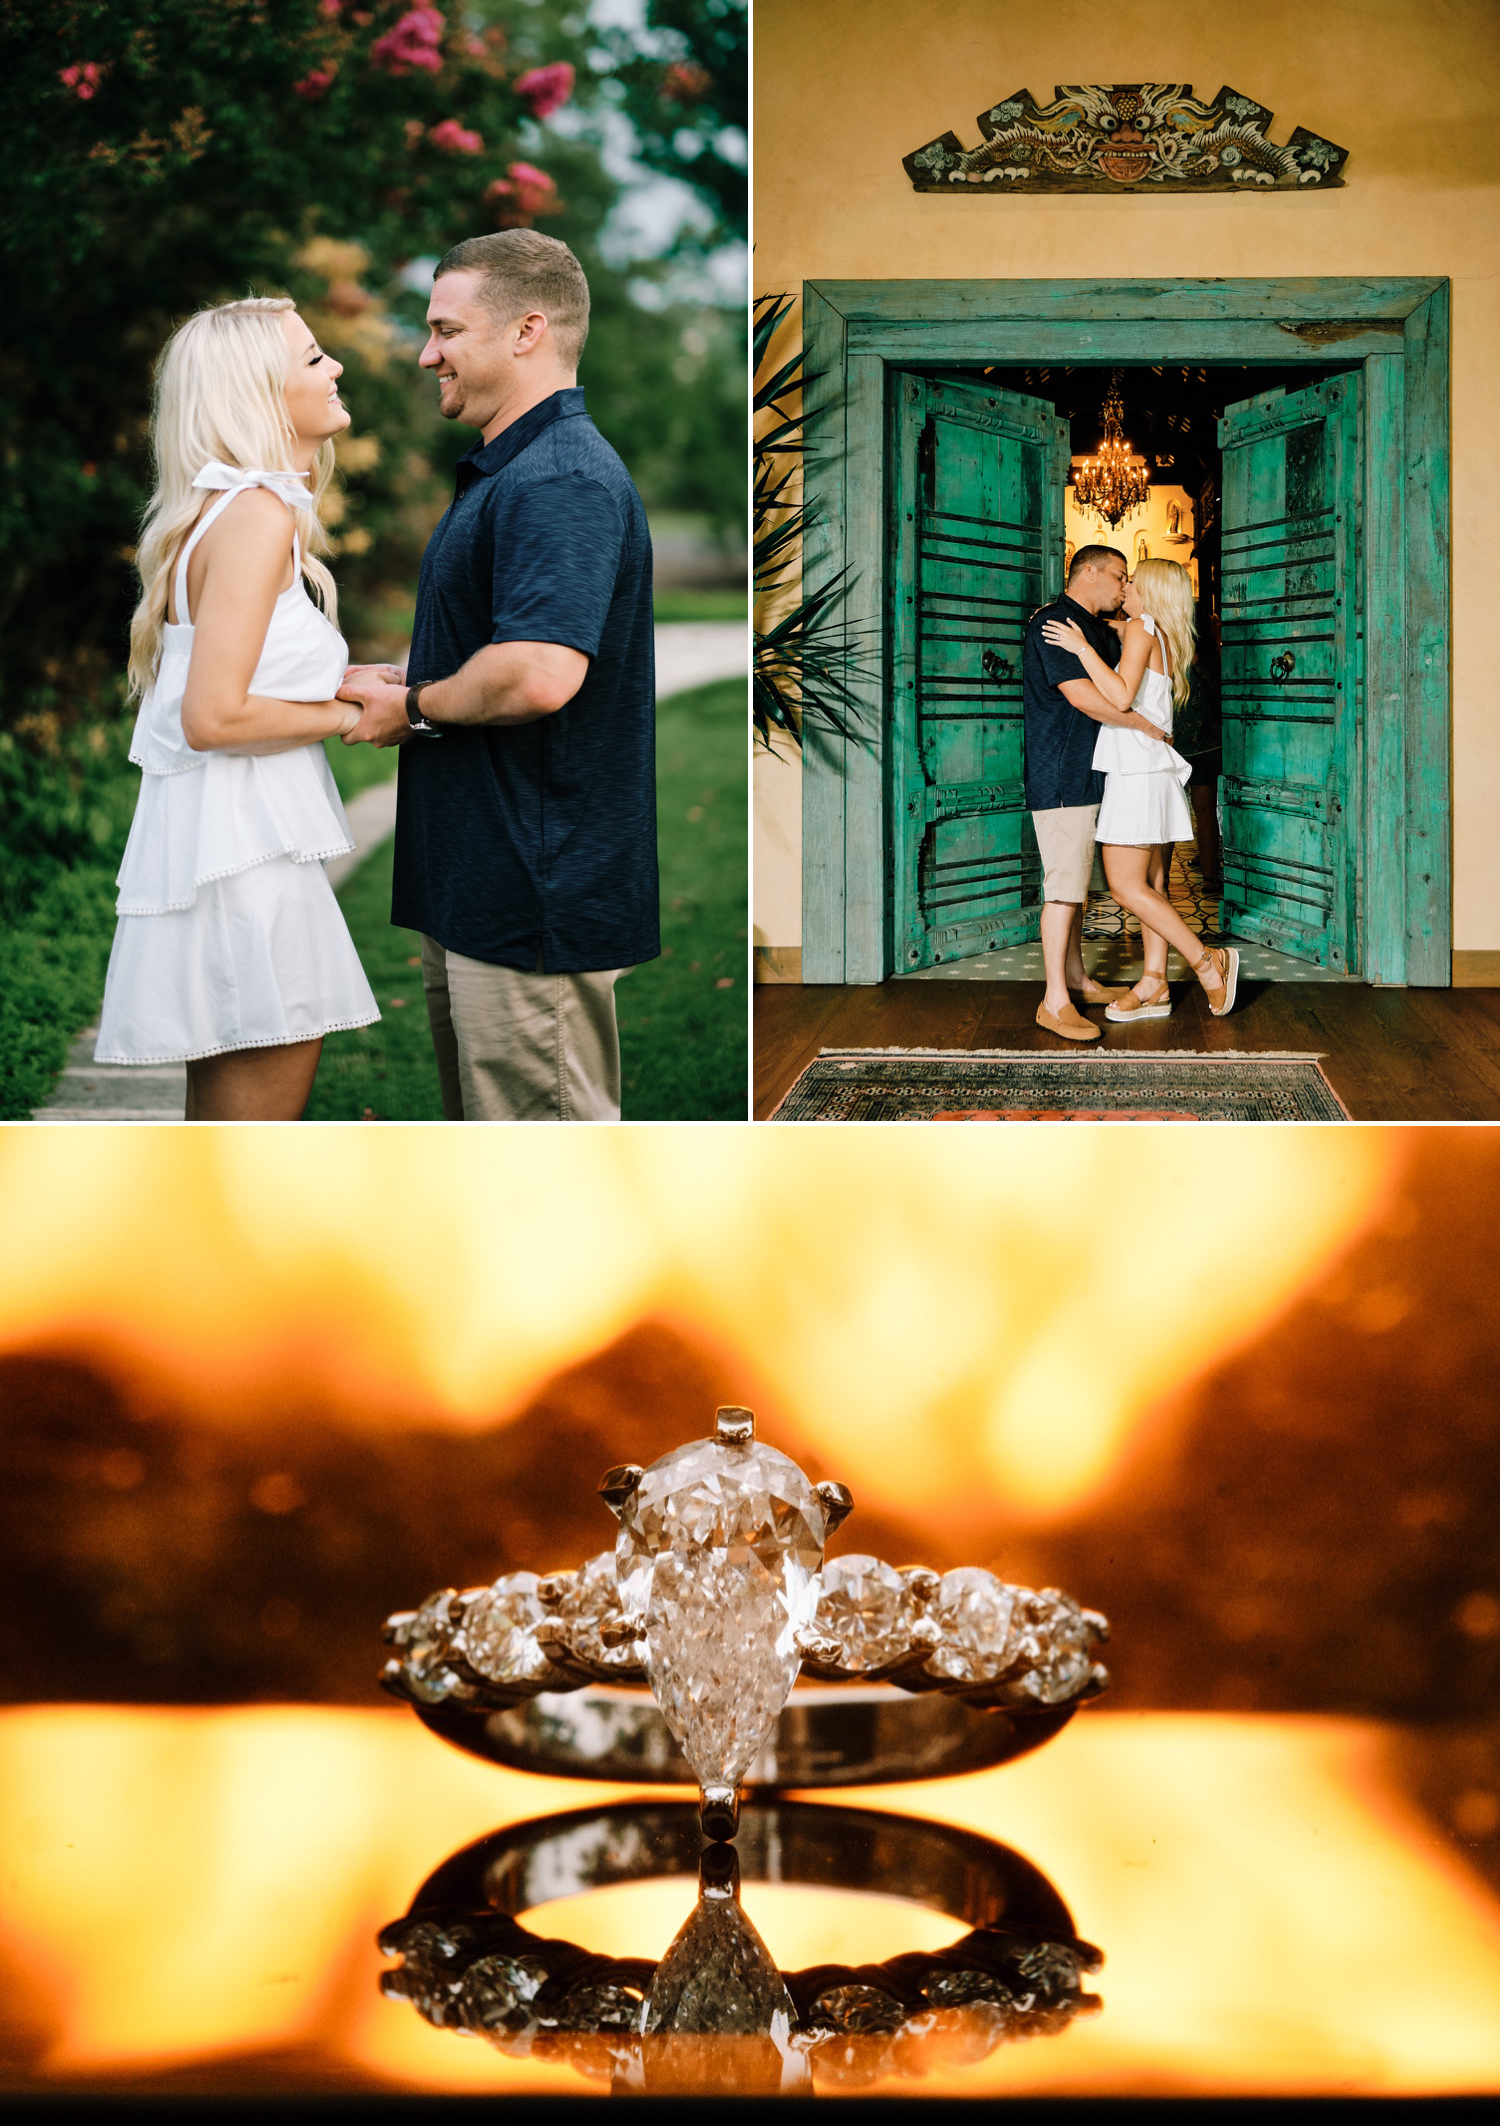 Proposal at Tillie's Restaurant in Camp Lucy, Dripping Springs TX ~ Dripping Springs wedding photographer